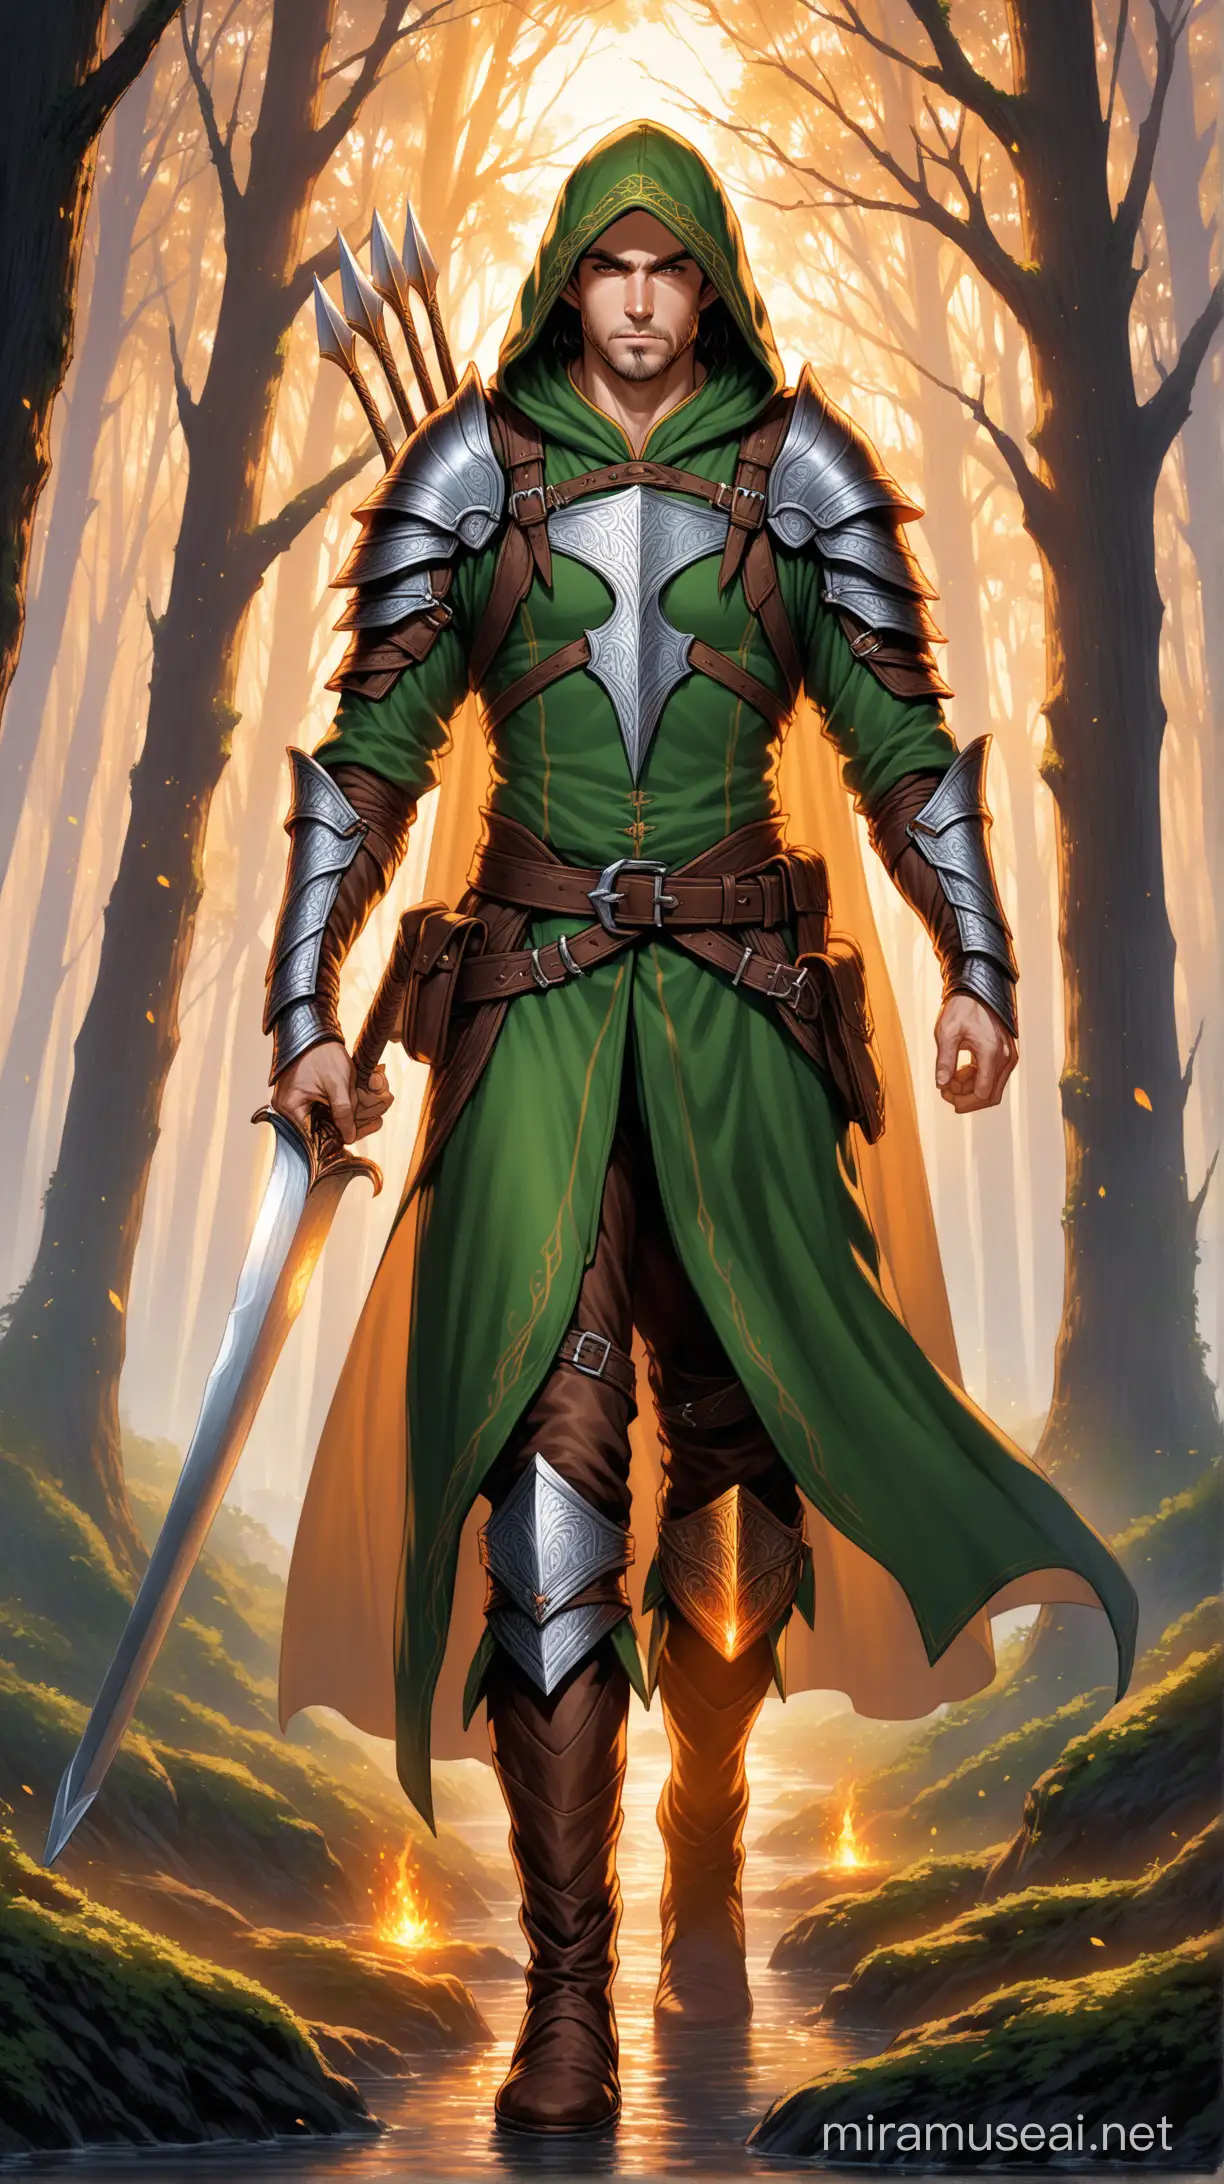 Mysterious Elven Sentinel at Twilight Magical Defender in Leather Armor